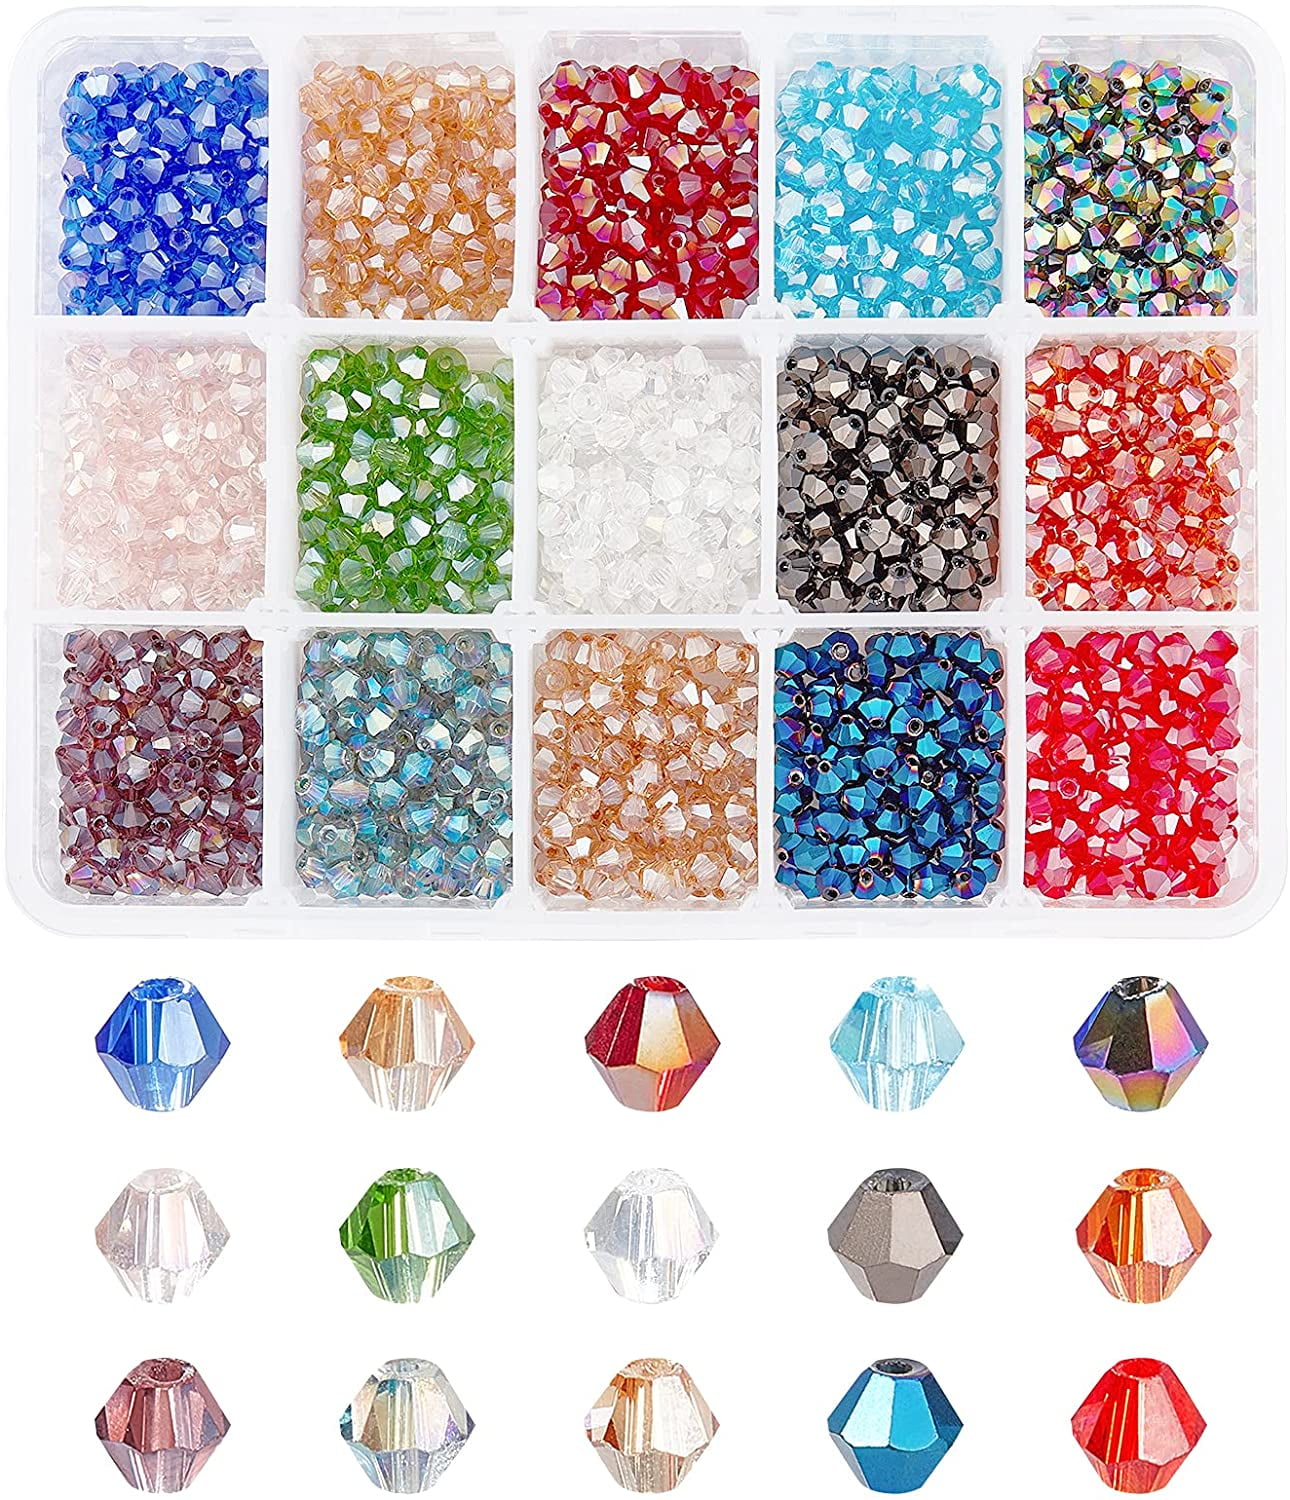 faceted bicone glass beads for jewelry